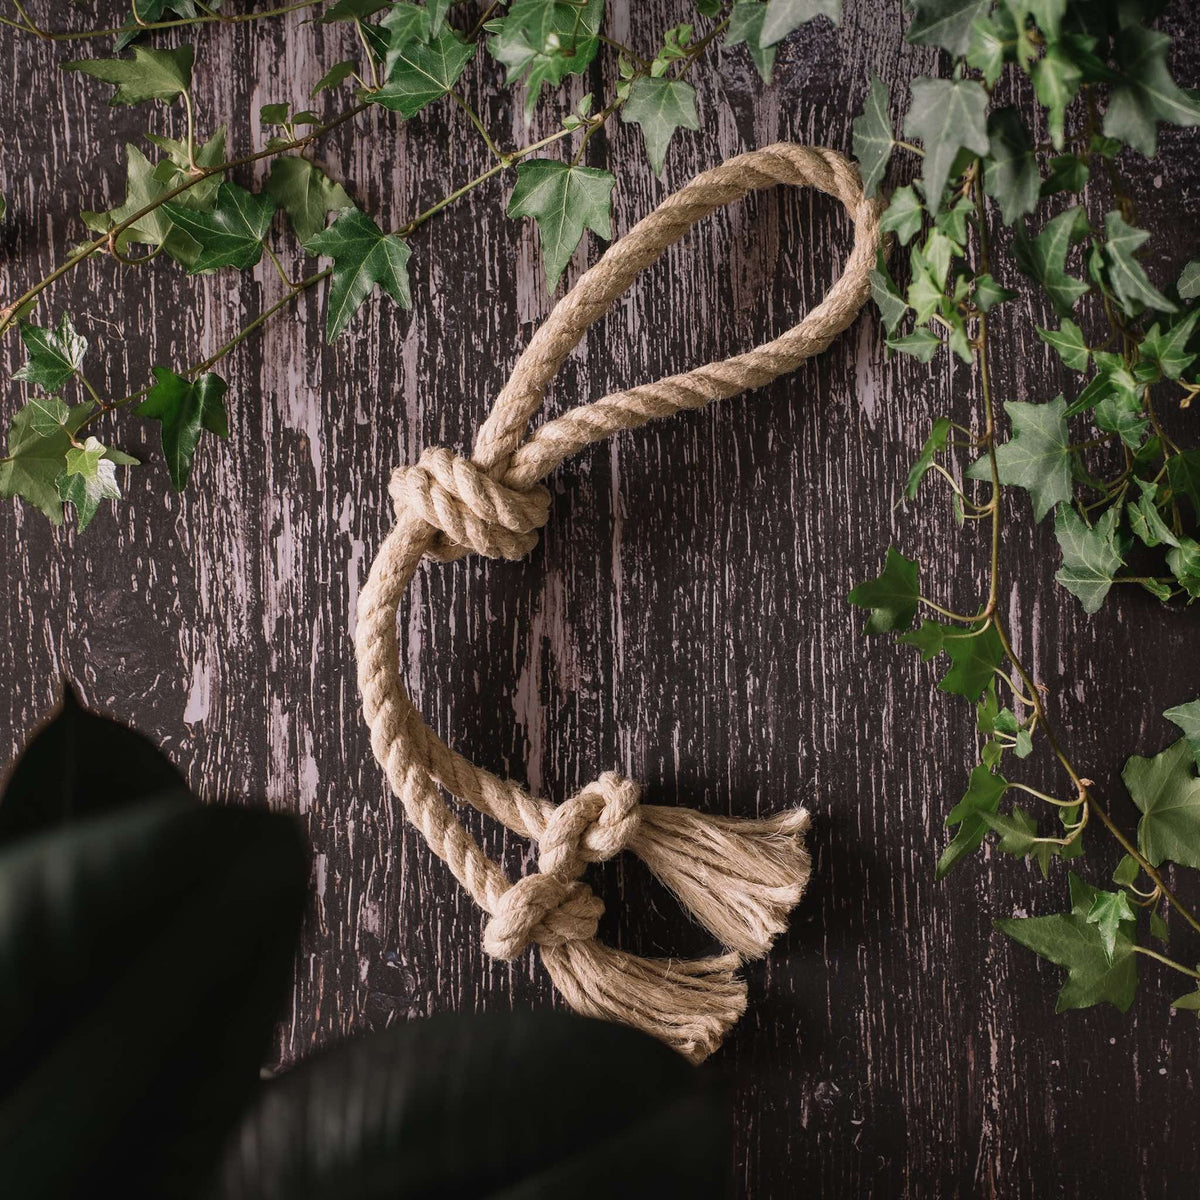 Knot Again - Smug Mutts Natural and Organic Hemp Rope Toy, Ring Shape with Loop and Two Knots, Eco Friendly Dog Toy on a Dark Wood Background